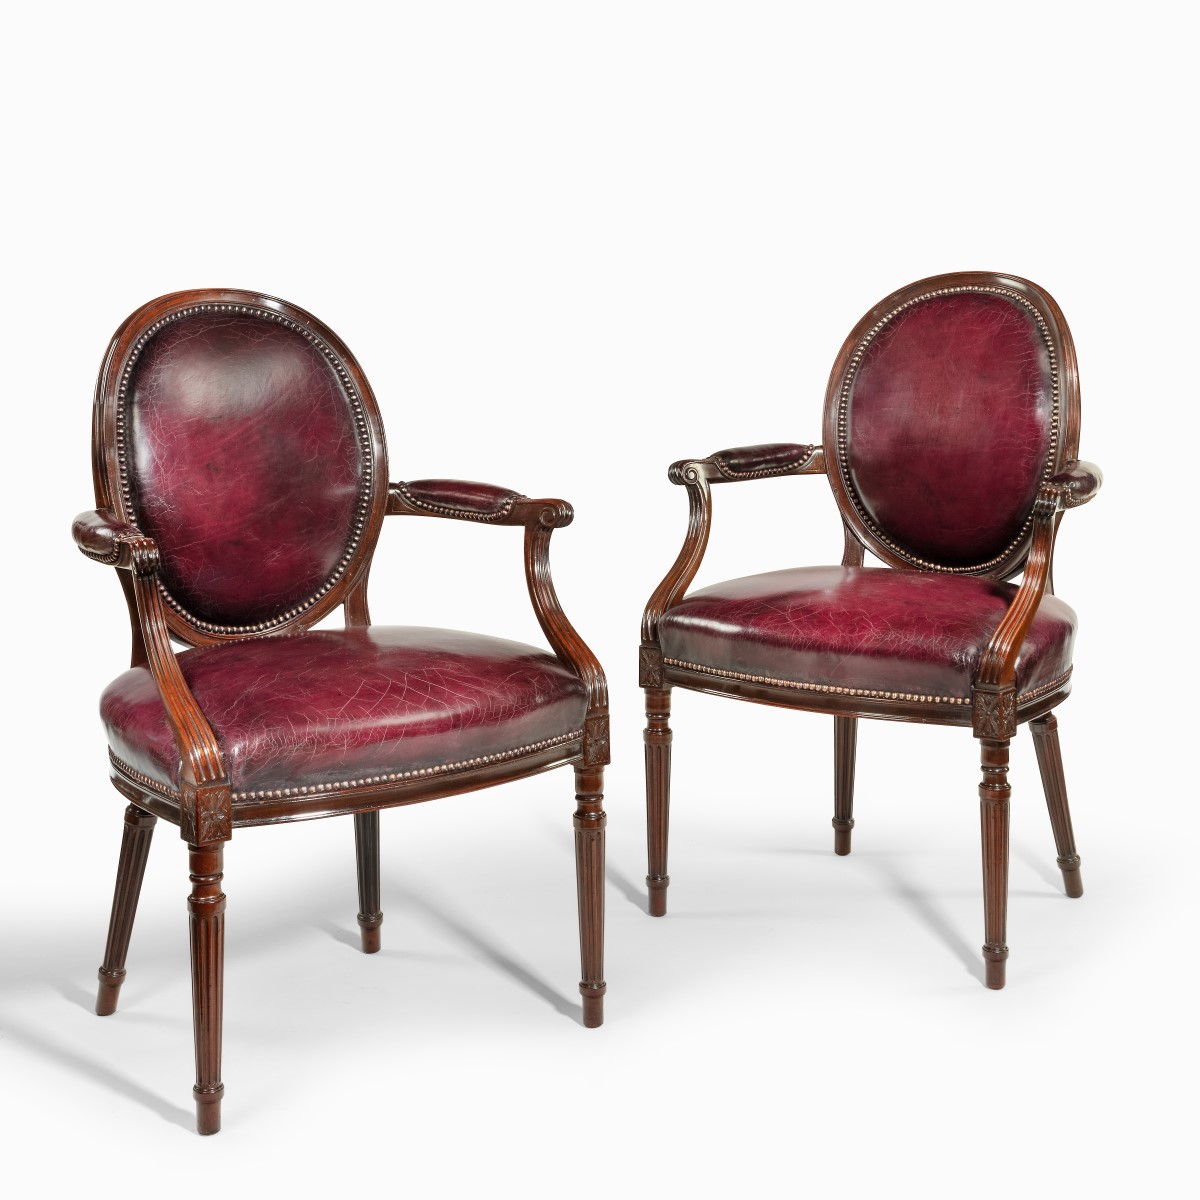 Two Edwardian mahogany chairs by Gill & Reigate